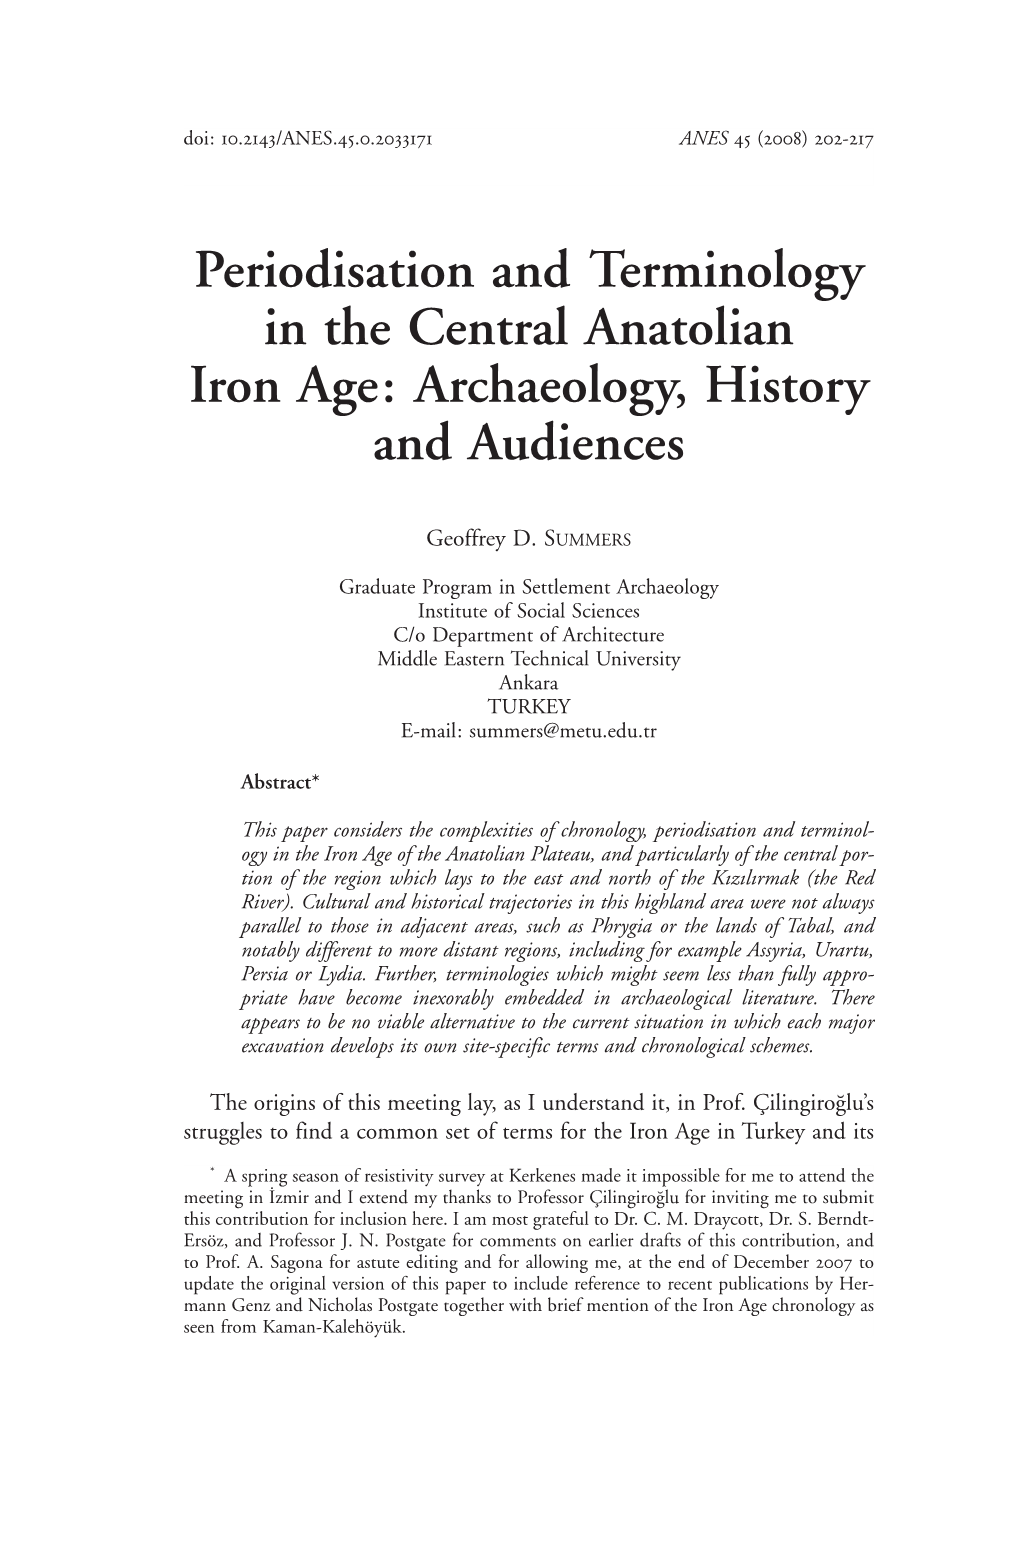 Periodisation and Terminology in the Central Anatolian Iron Age: Archaeology, History and Audiences